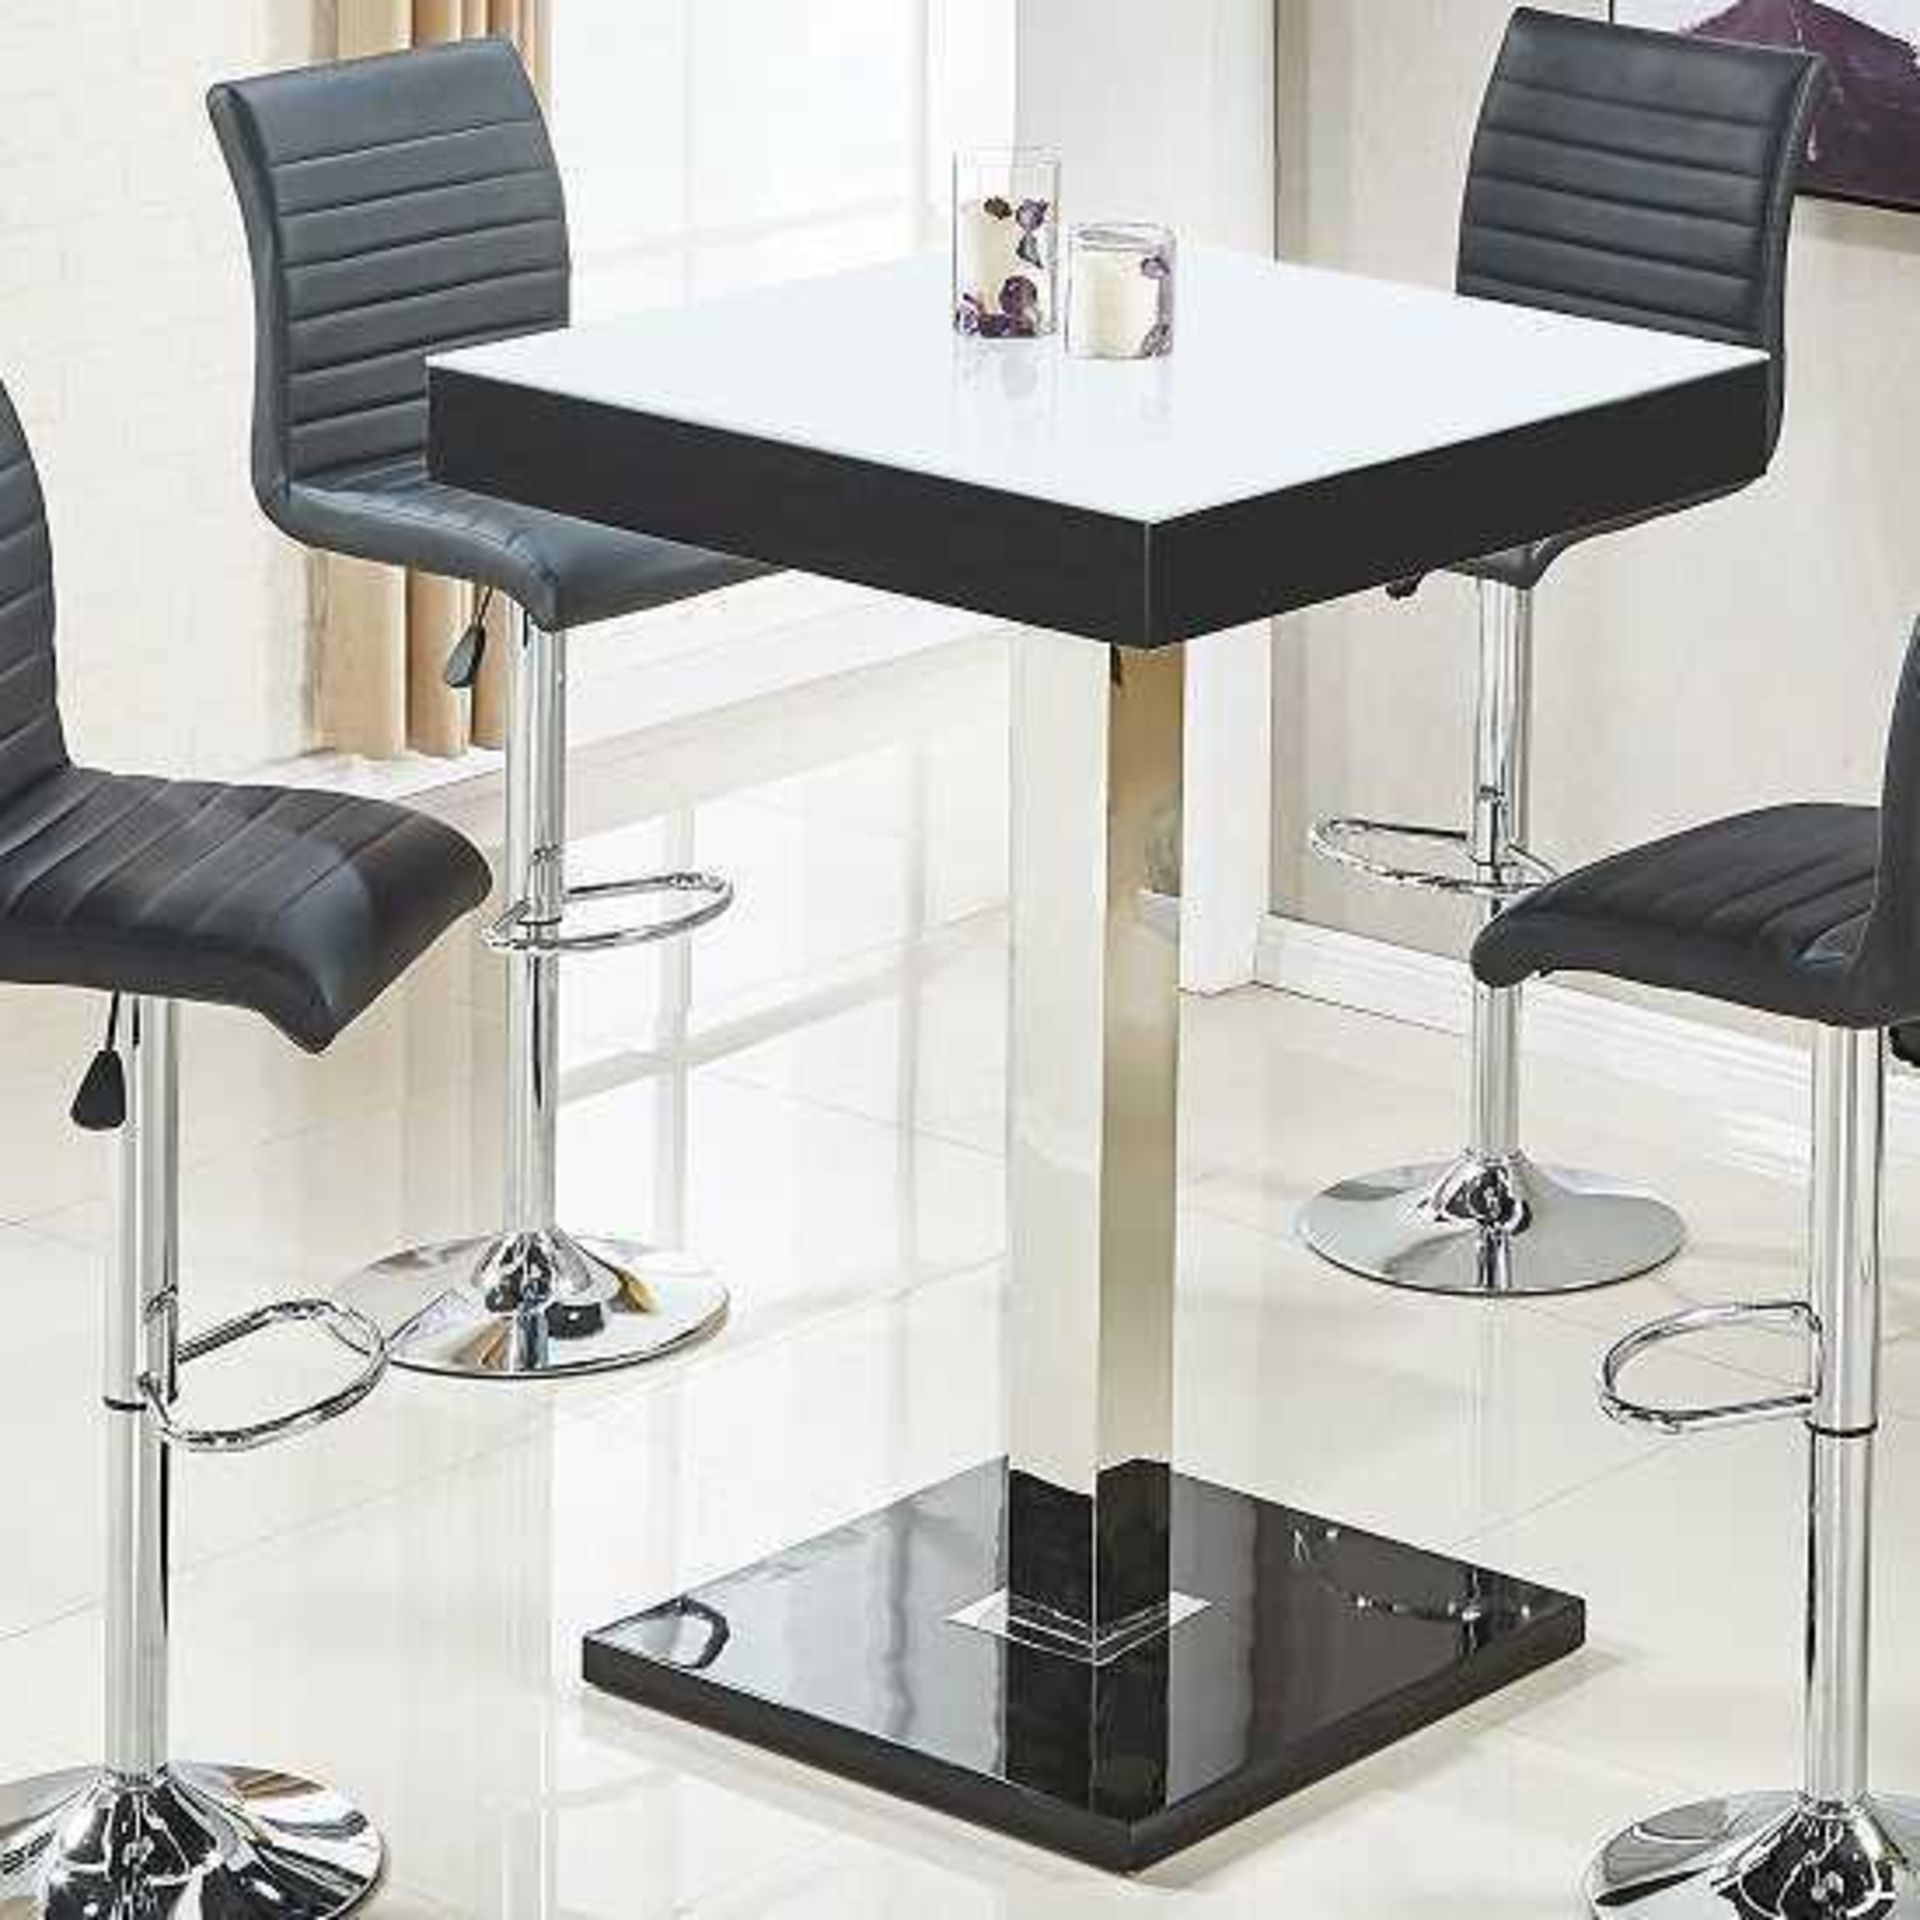 Boxed Topaz Square 80X80X110Cm Super White Glass With Black High Gloss Bar Table RRP £240(Appraisals